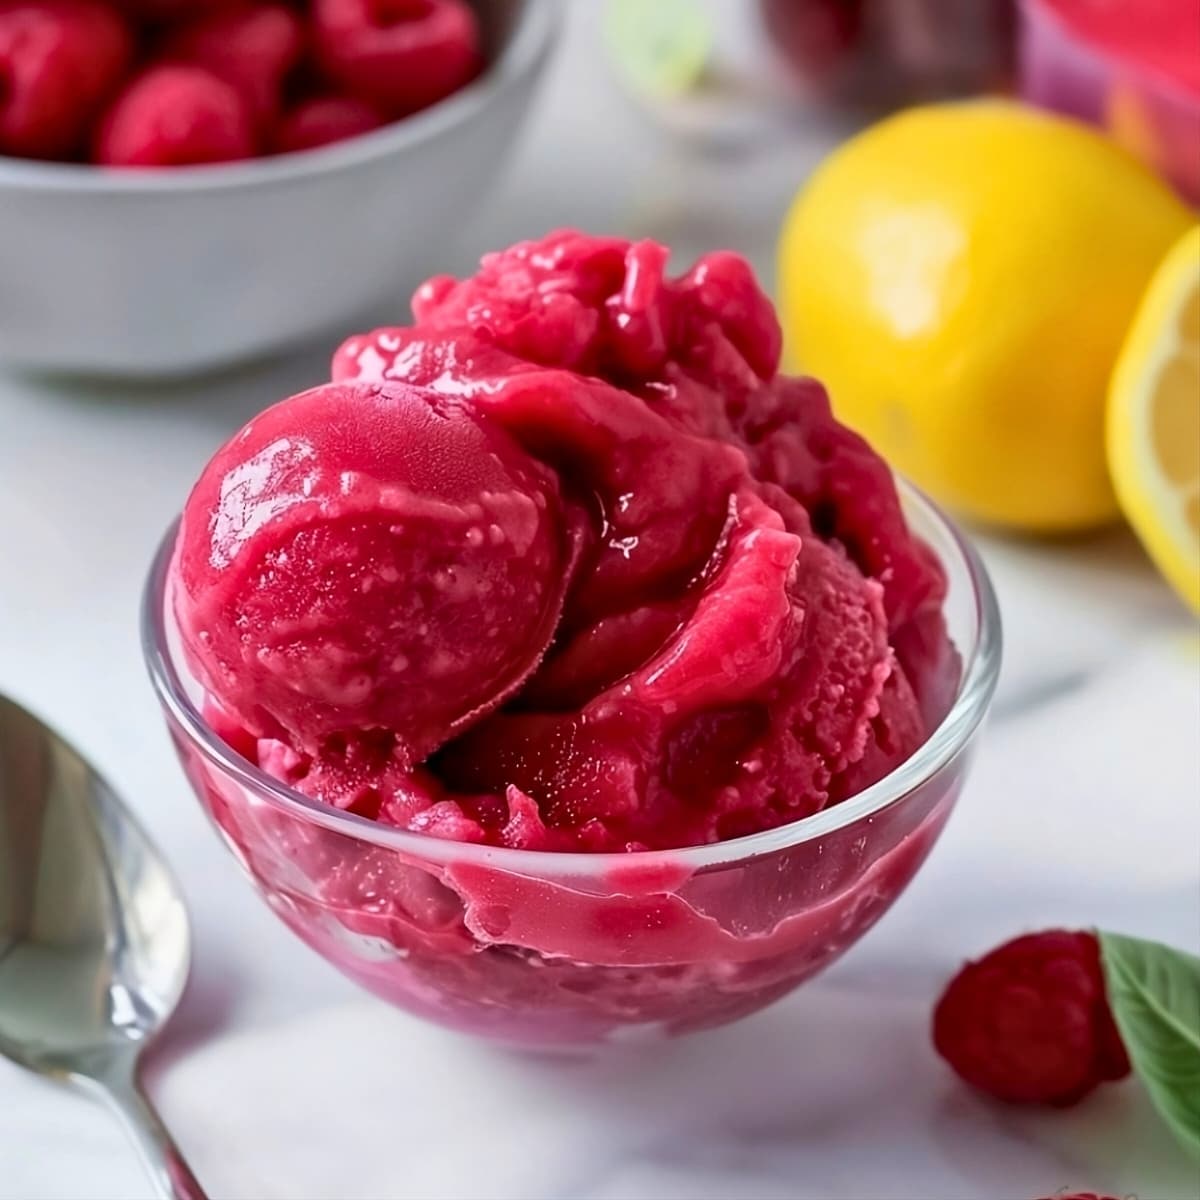 Raspberry sorbet served in a small glass bowl.